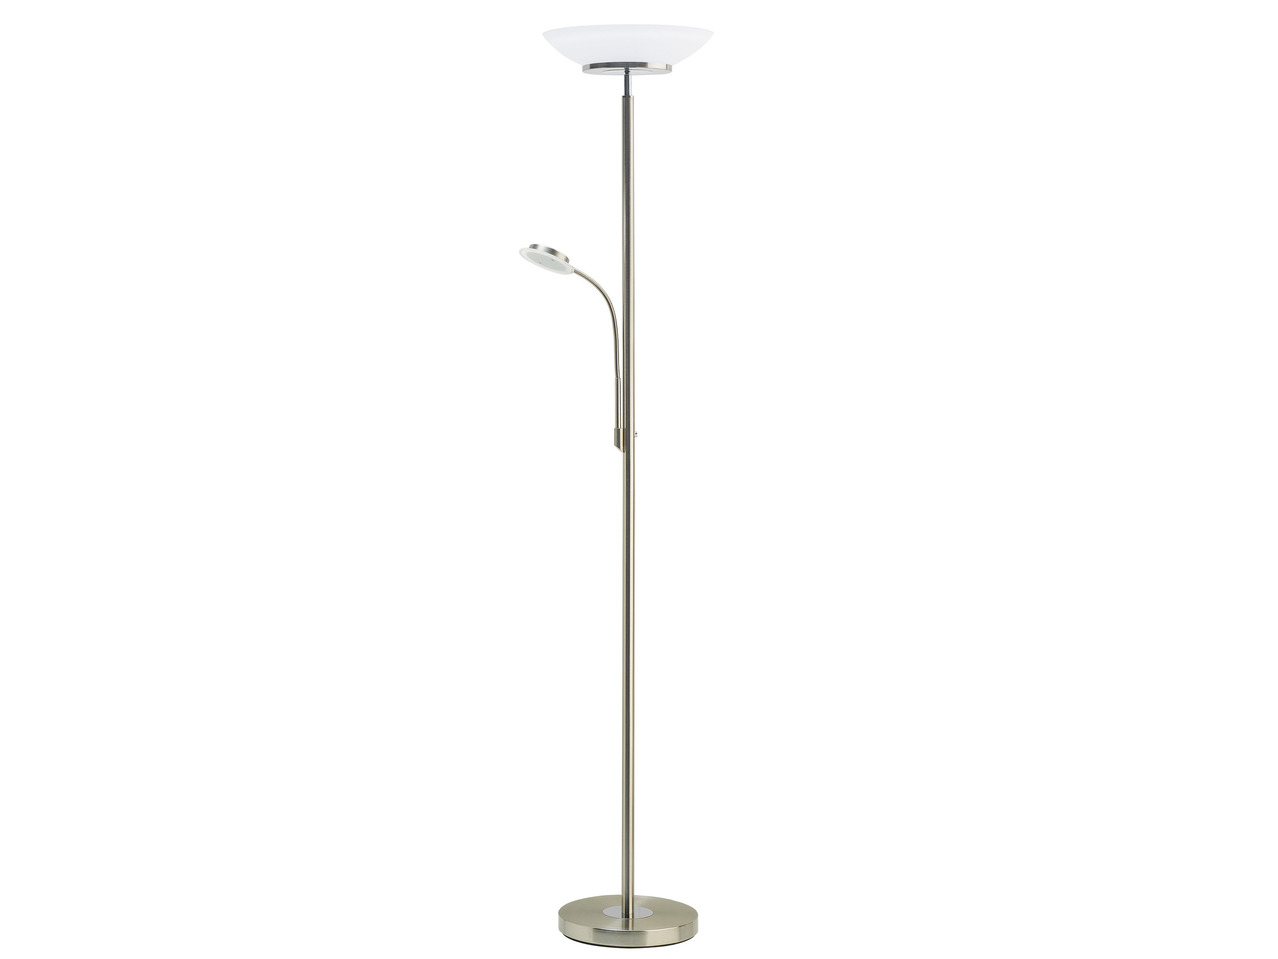 Livarno Lux Father and Child Uplighter LED Floor Lamp